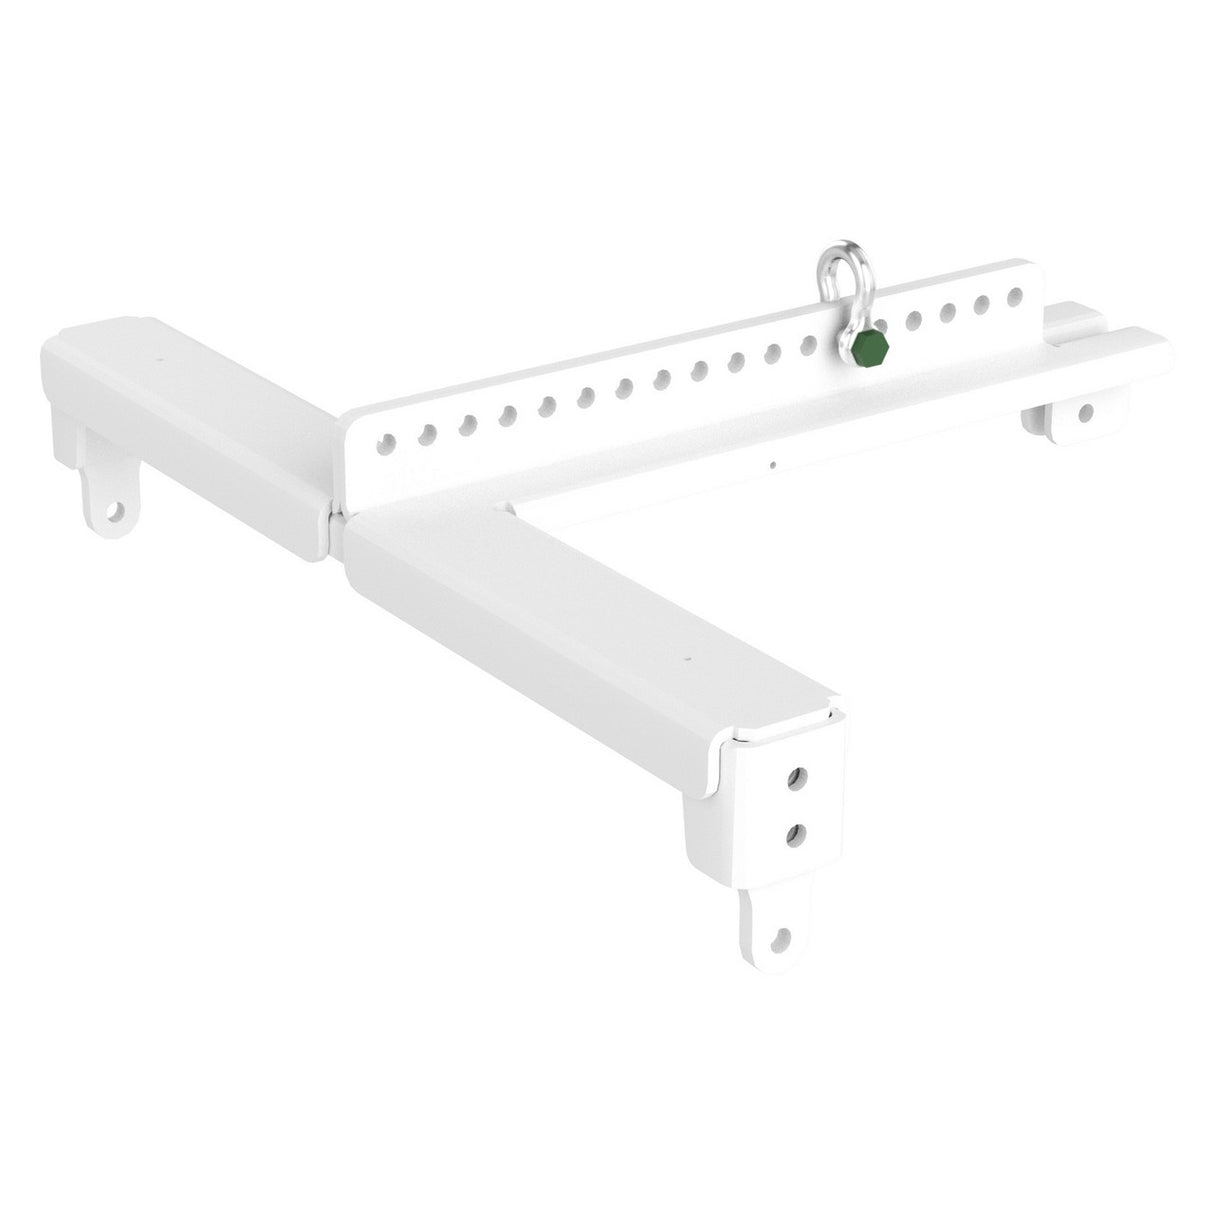 RCF FB-HDL10-LIGHT-W | Light Flybar for 6 HDL10 with Pole Mount Adaptor White